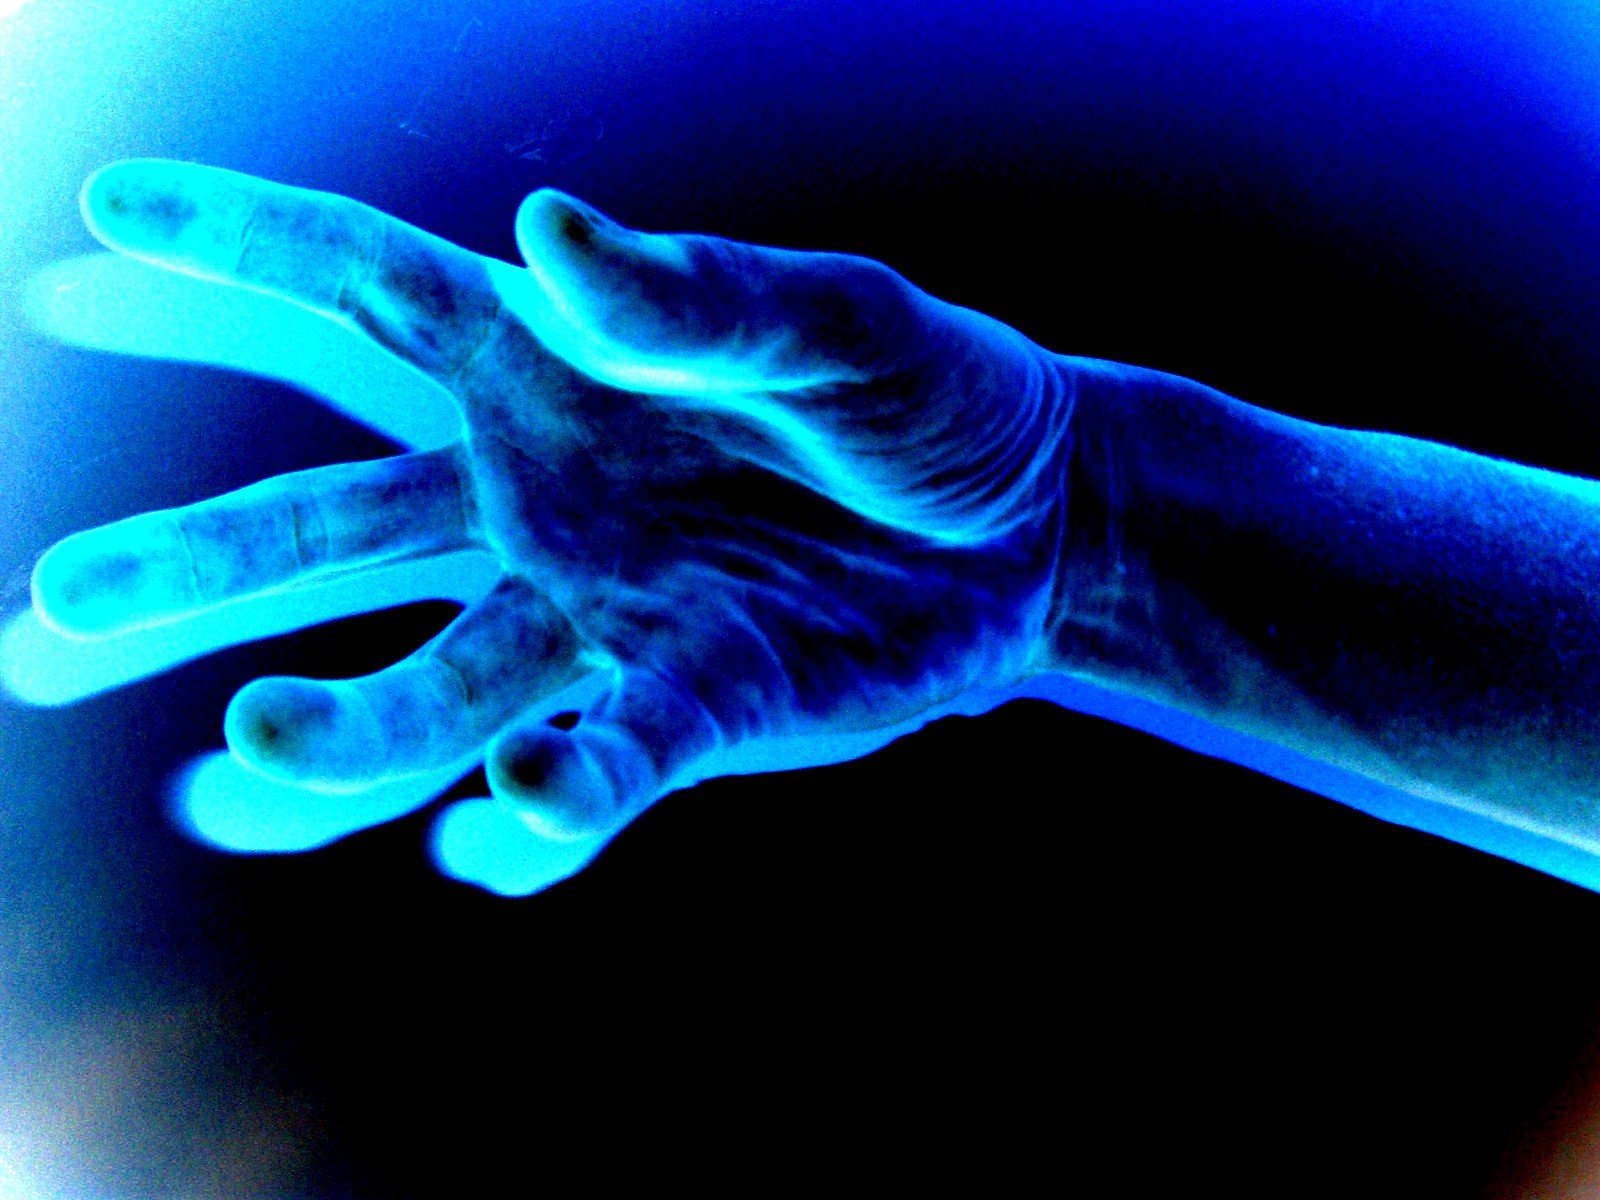 a person's hand is illuminated in blue